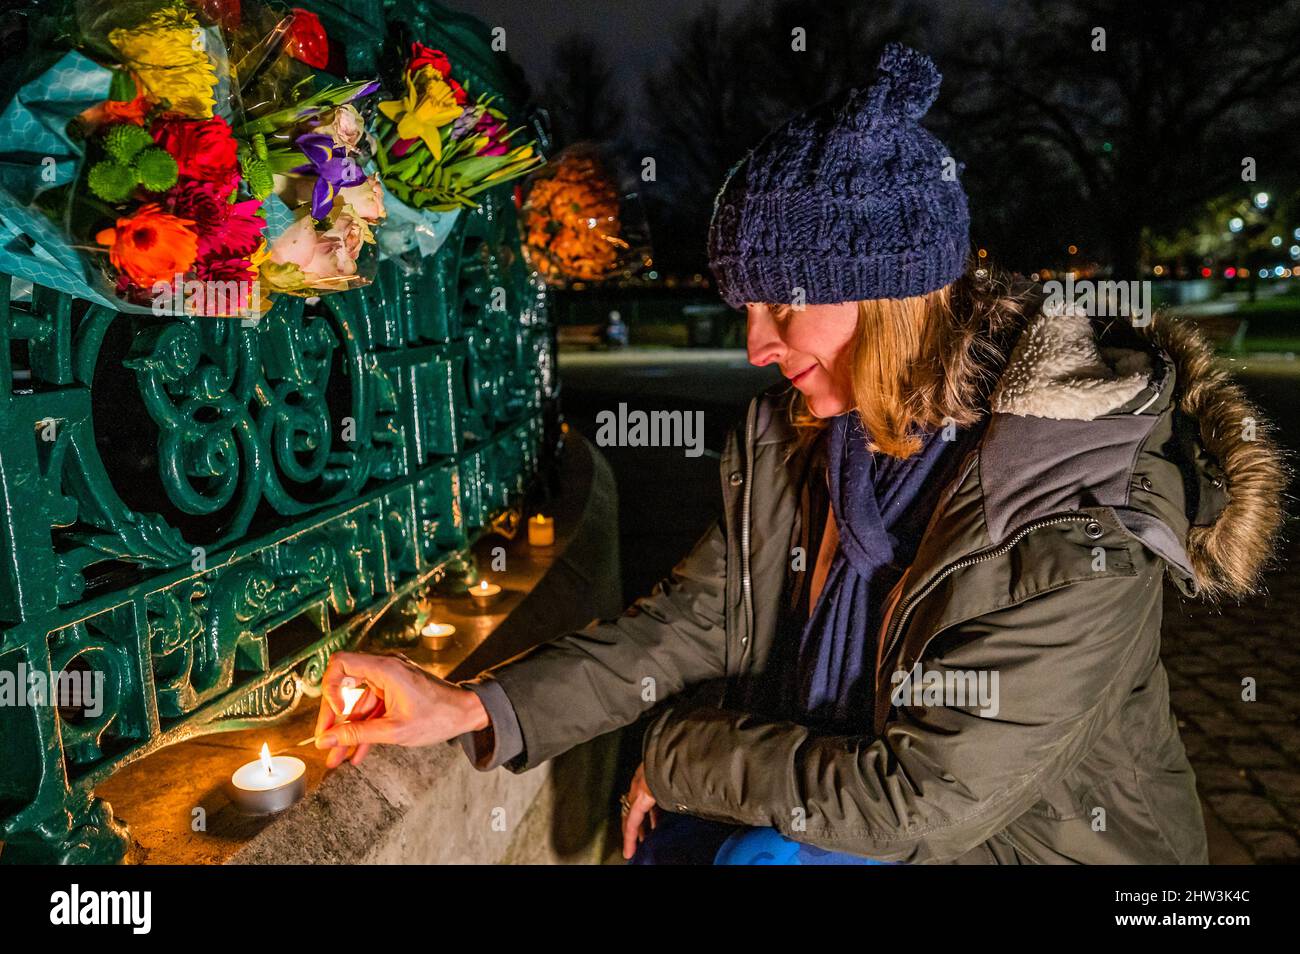 London, UK. 3rd Mar, 2022. Candles are lit - People gather at the Bandstand on Clapham Common on the first anniversary of the murder of Sarah Everard - organised by Urban Angels. She disappeared on March 3 2021 on her way home from Clapham to Brixton. Credit: Guy Bell/Alamy Live News Stock Photo